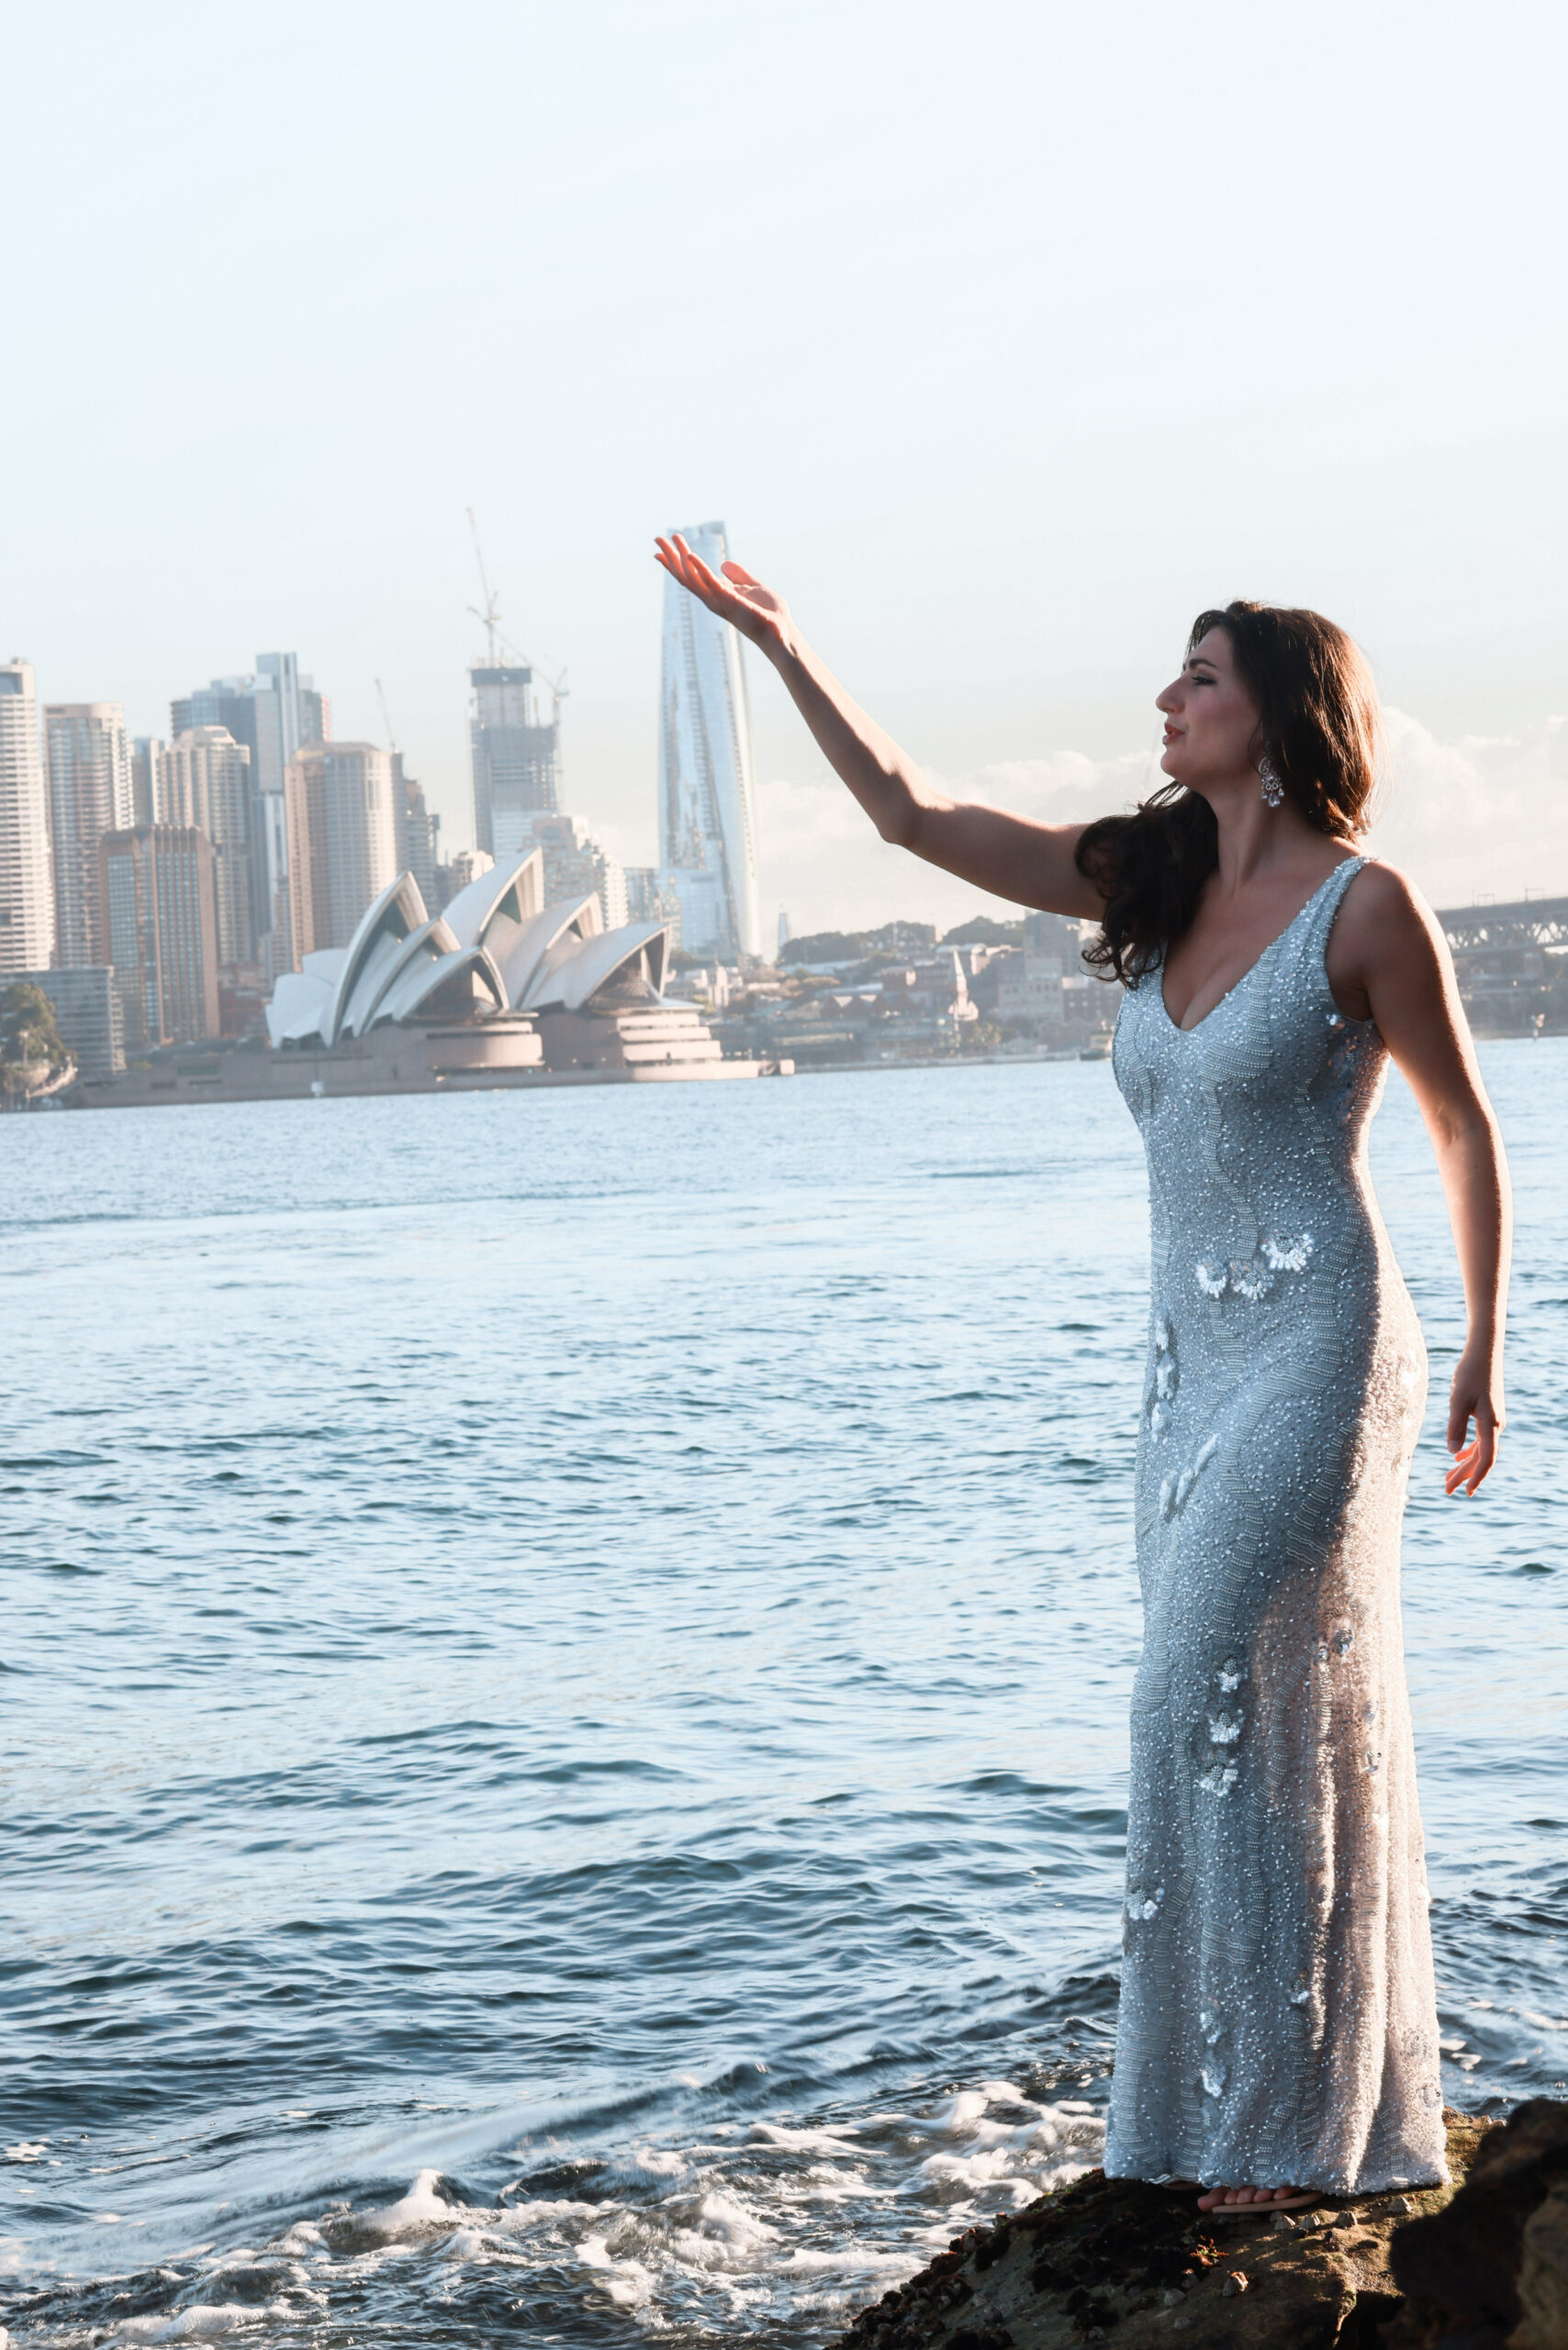 Opera for young regional Australia - from the Outback to the world